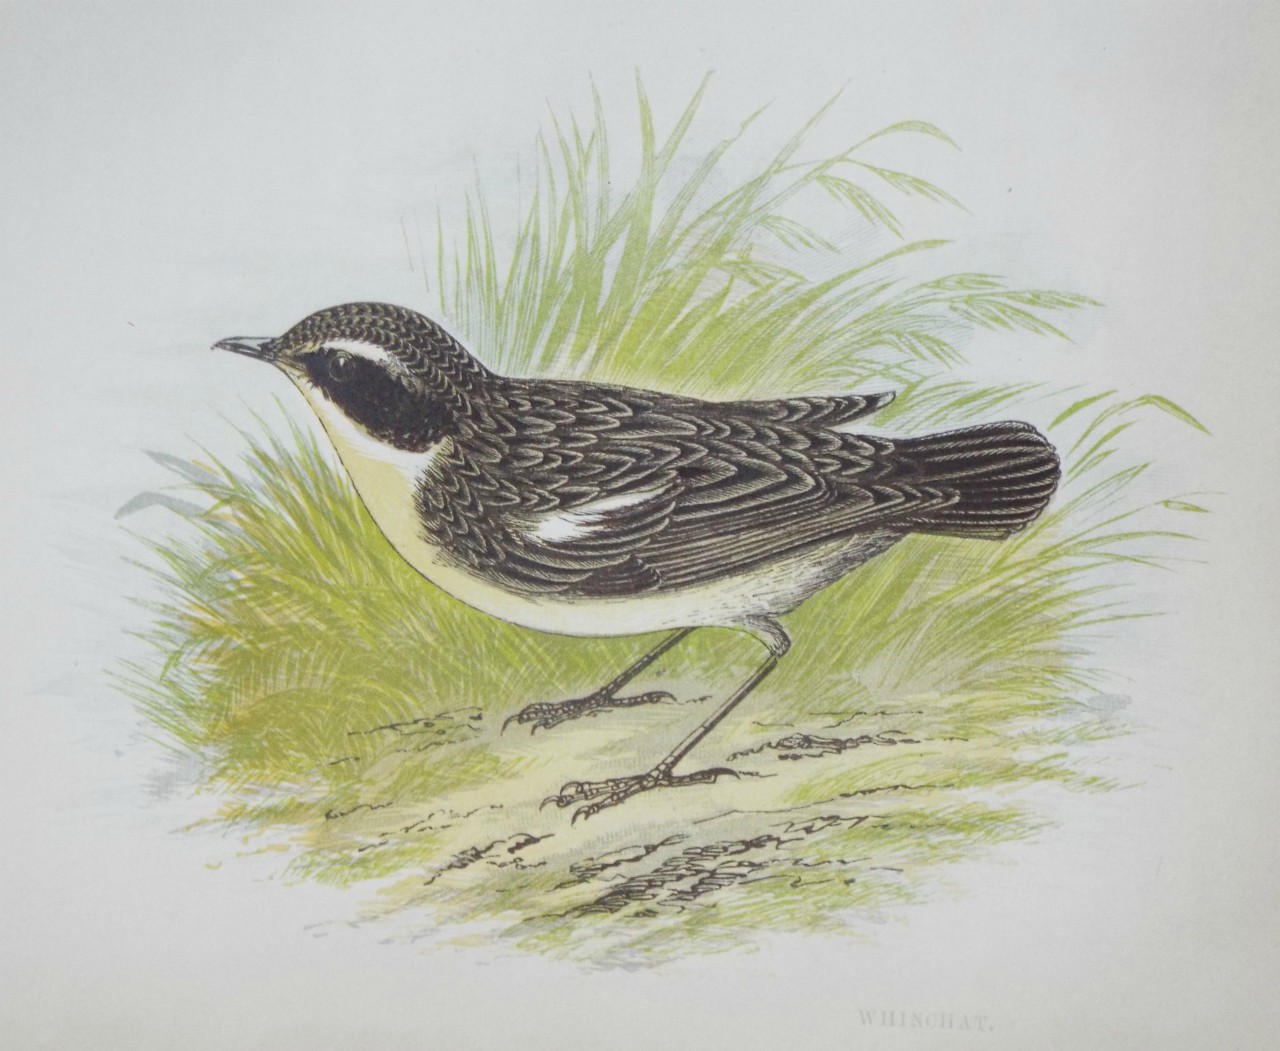 Chromo-lithograph - Whinchat.